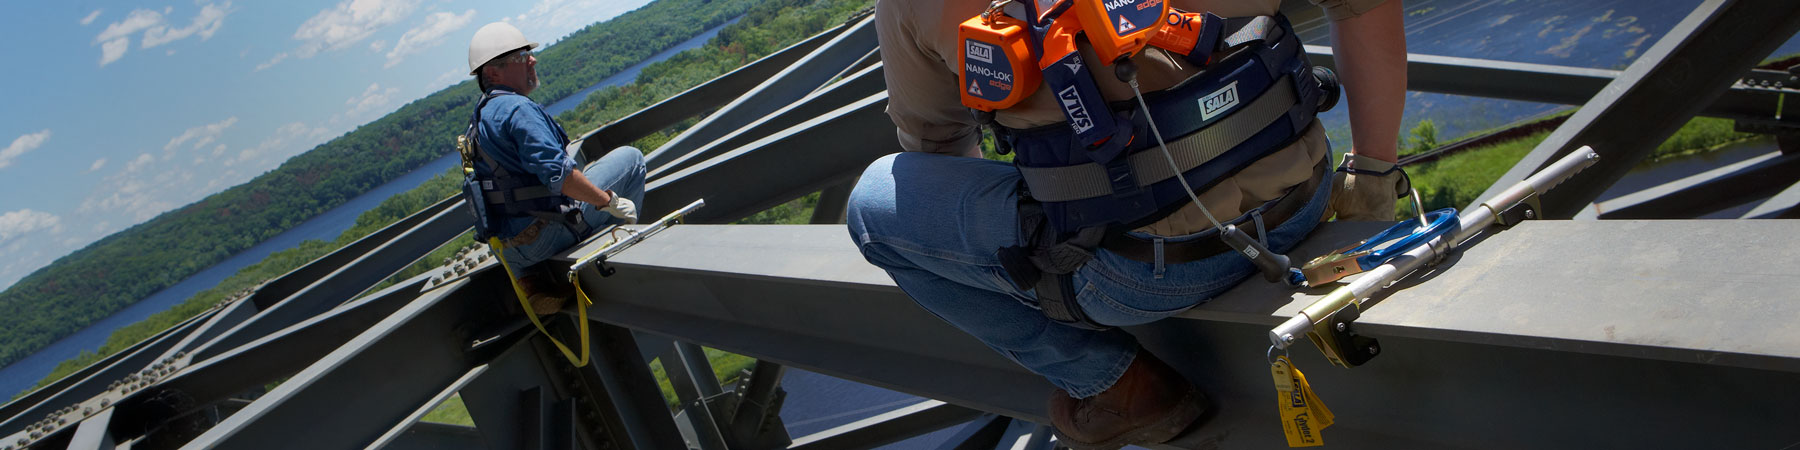 Fall Protection Anchors for Steel Beams